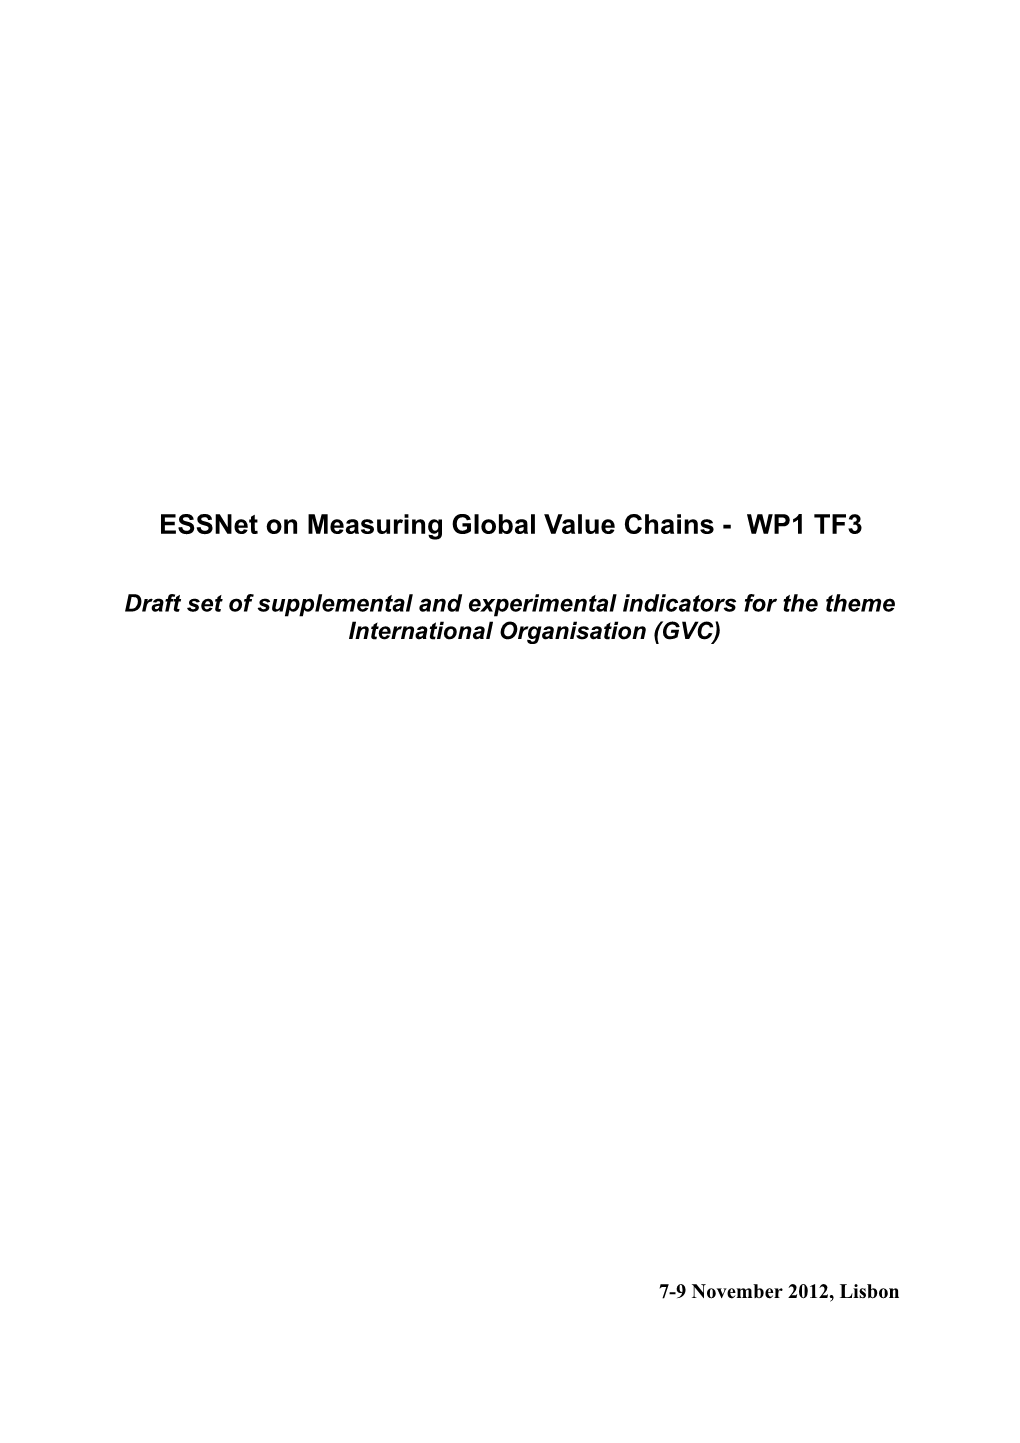 Essnet on Measuring Global Value Chains - WP1 TF3